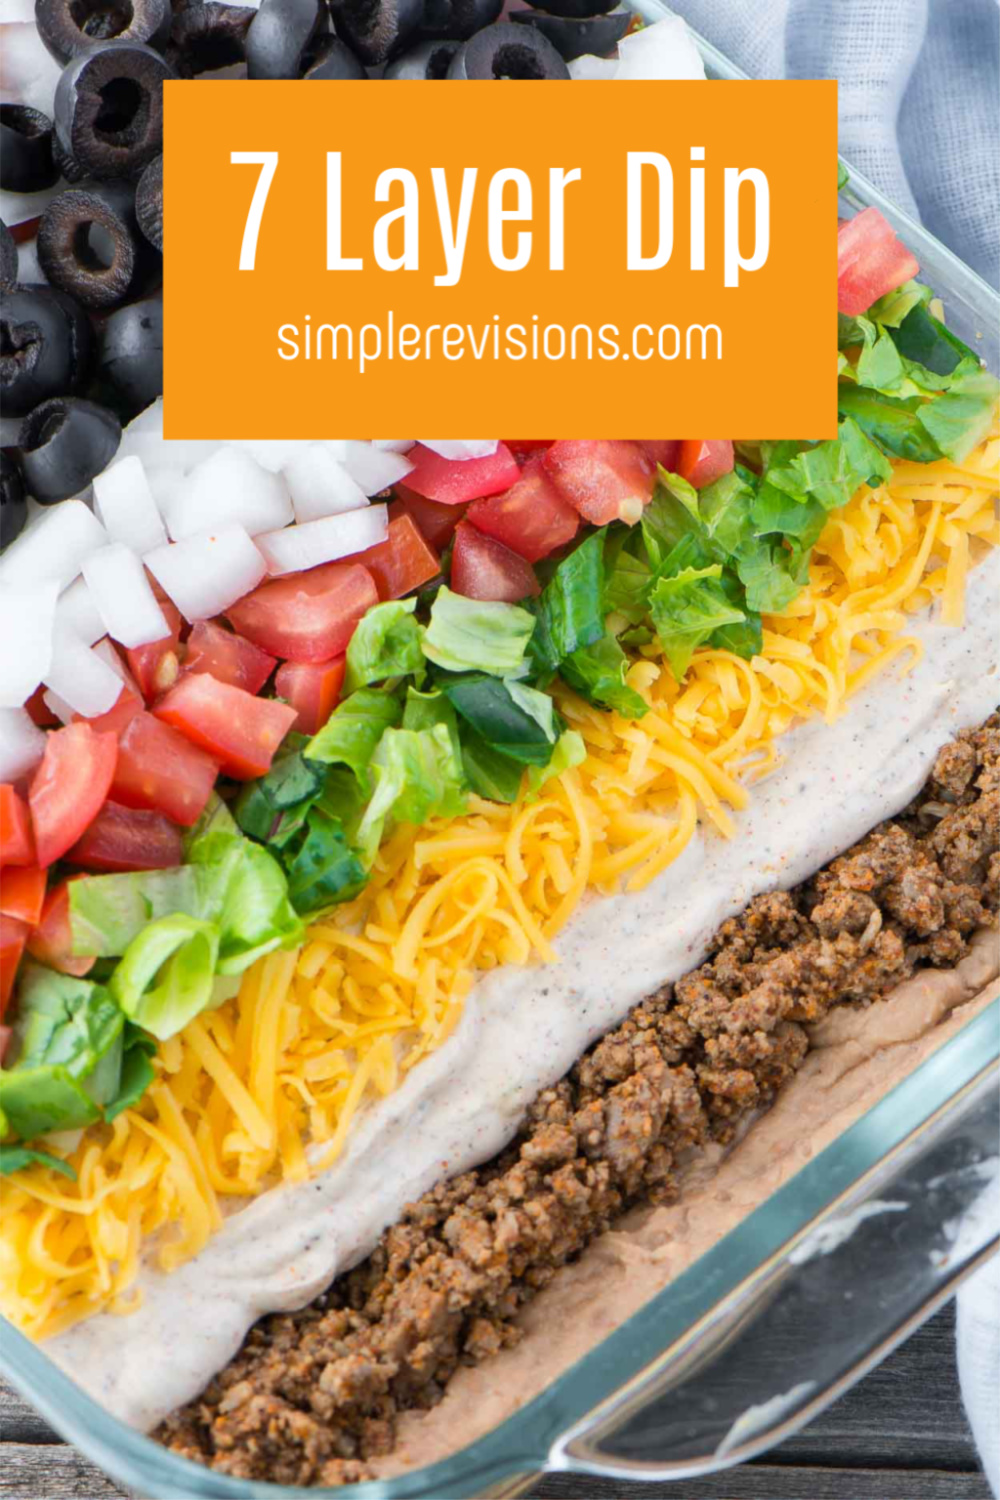 How to Make The Best 7 Layer Dip - Simple Revisions